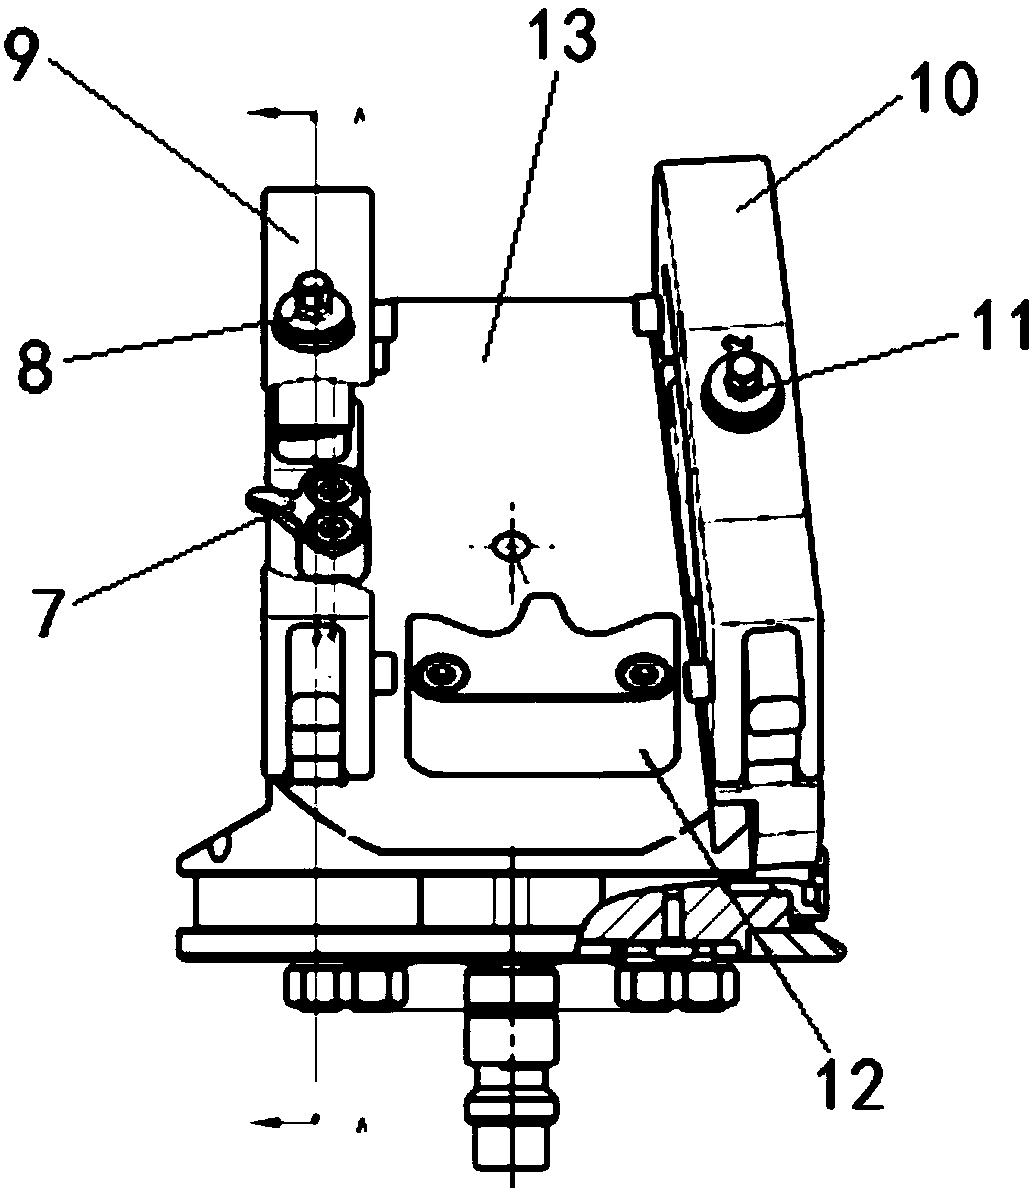 Blade profile clamping device for machining of precision forging blade of aero-engine